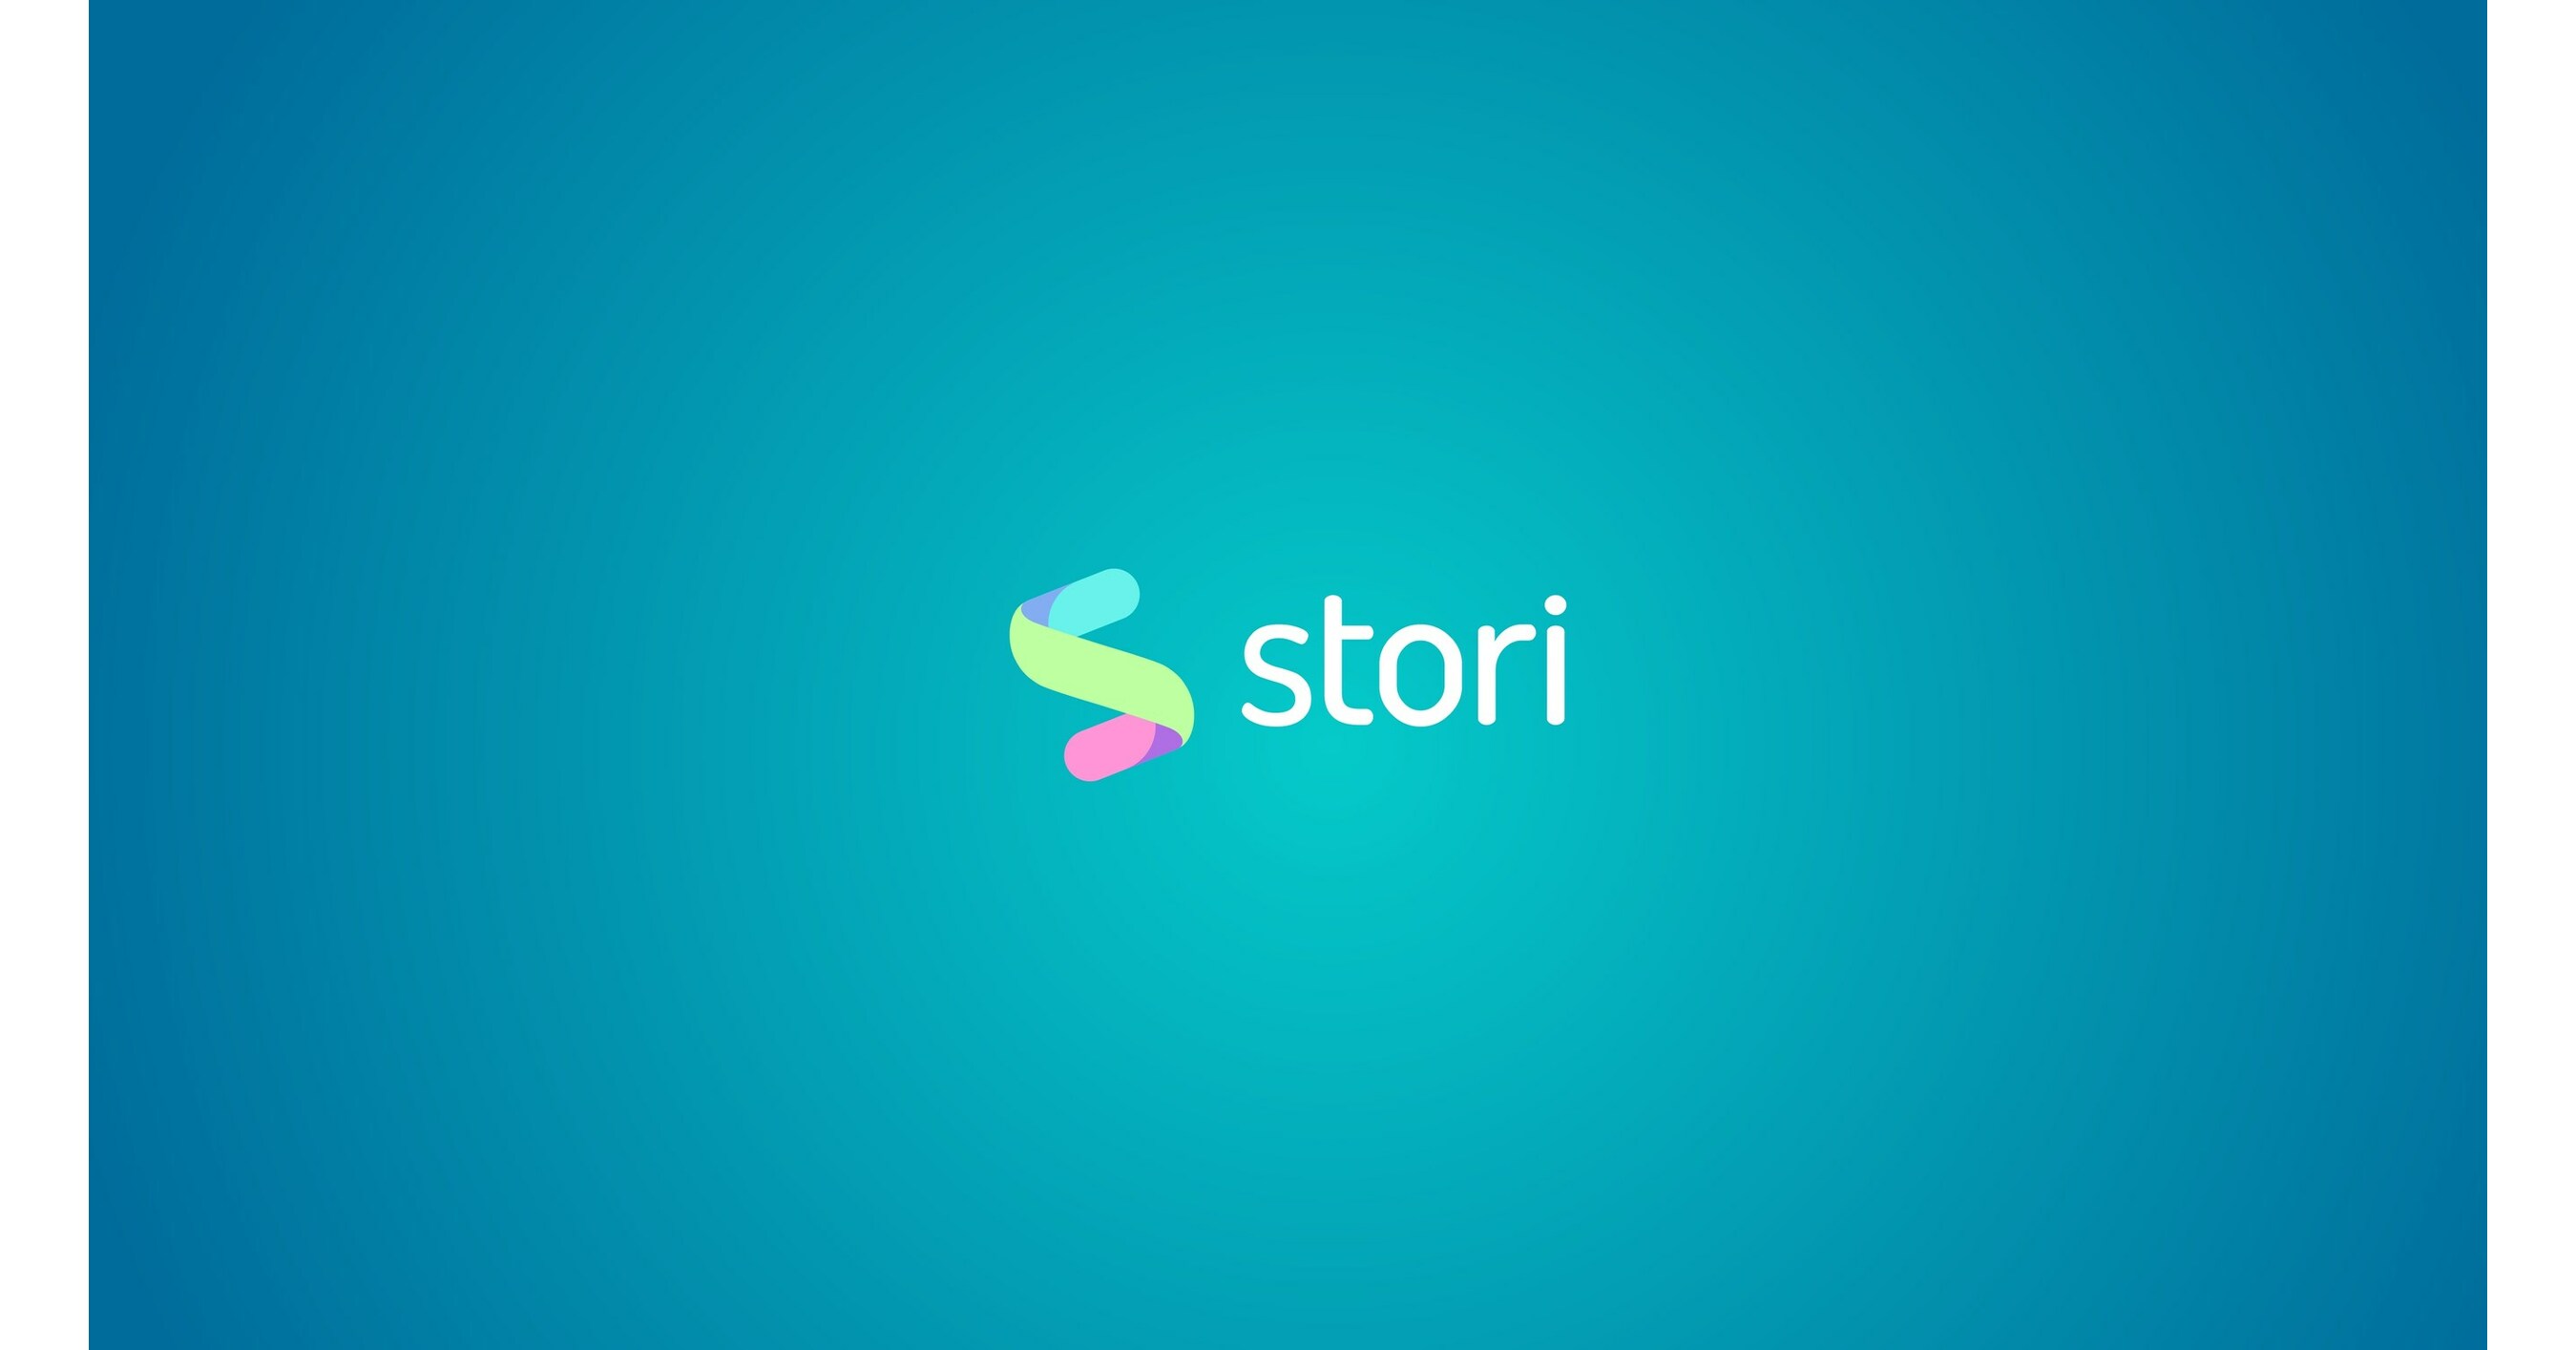 Stori, the Mexican Unicorn, obtains approval to acquire the Sofipo